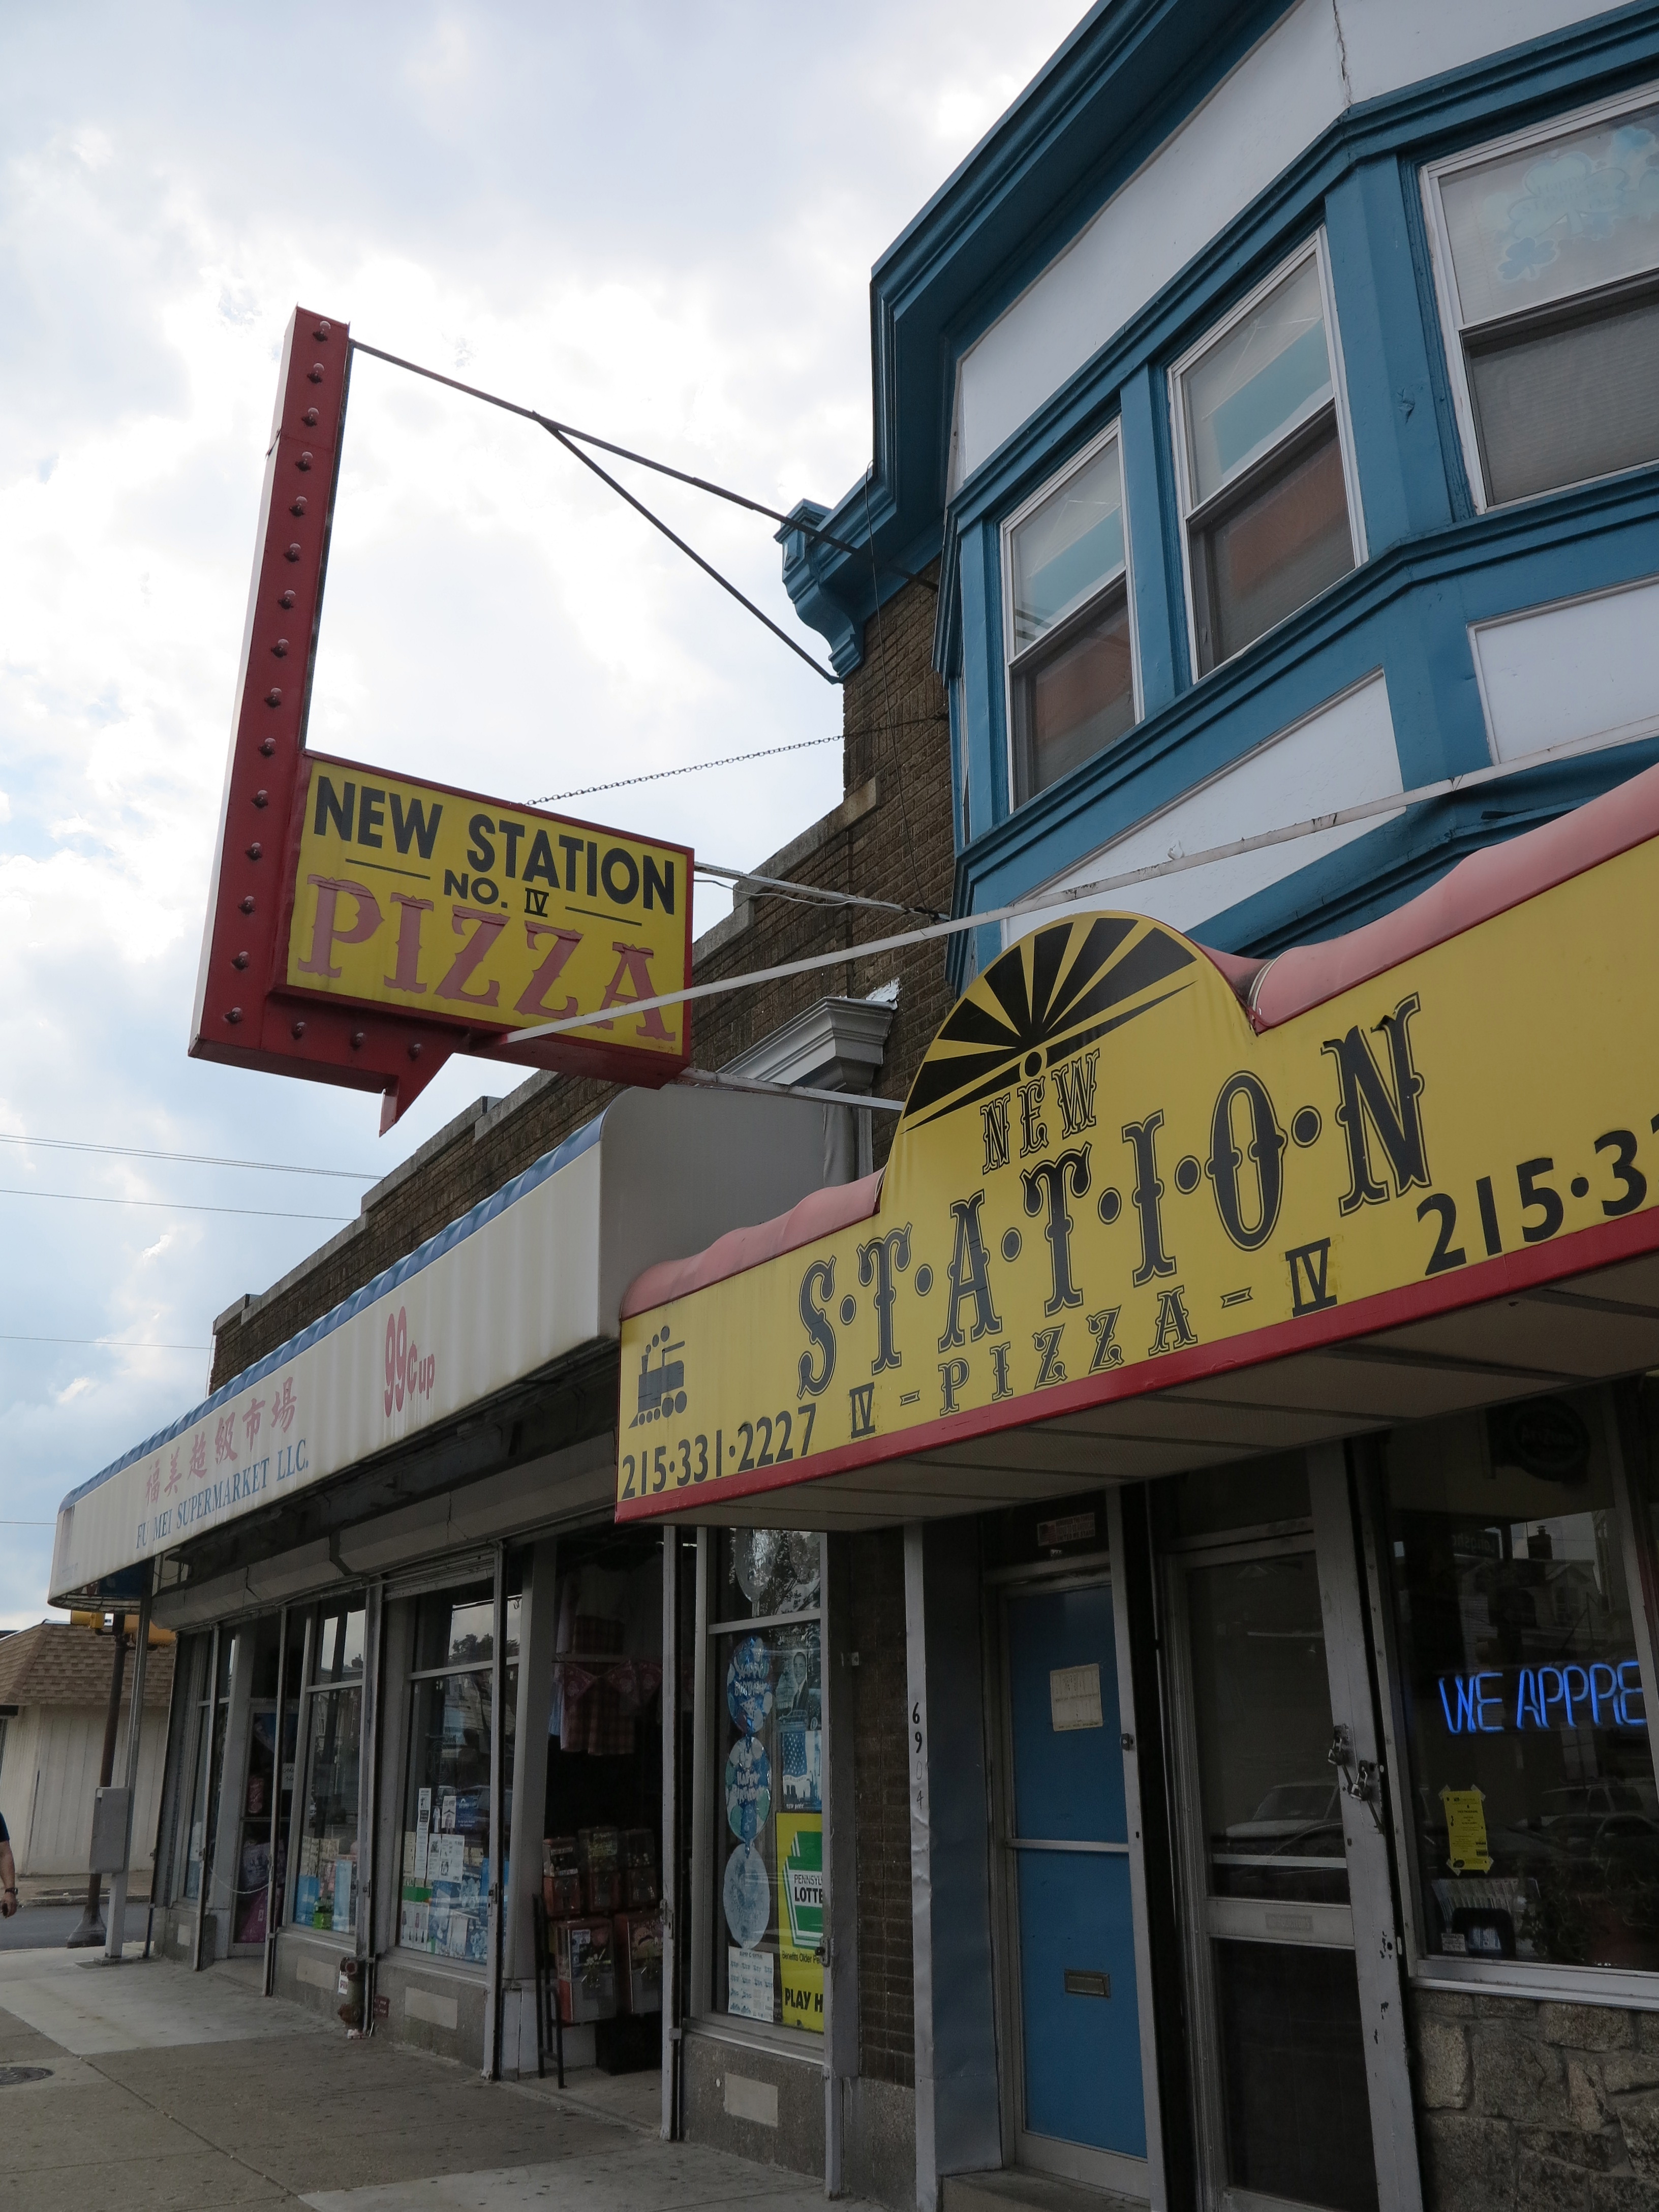 New Station Pizza (6904 Torresdale) and its next door neighbor Fu Mei Mart (6900 Torresdale) will both get improved signage and awnings as part of the facade program.